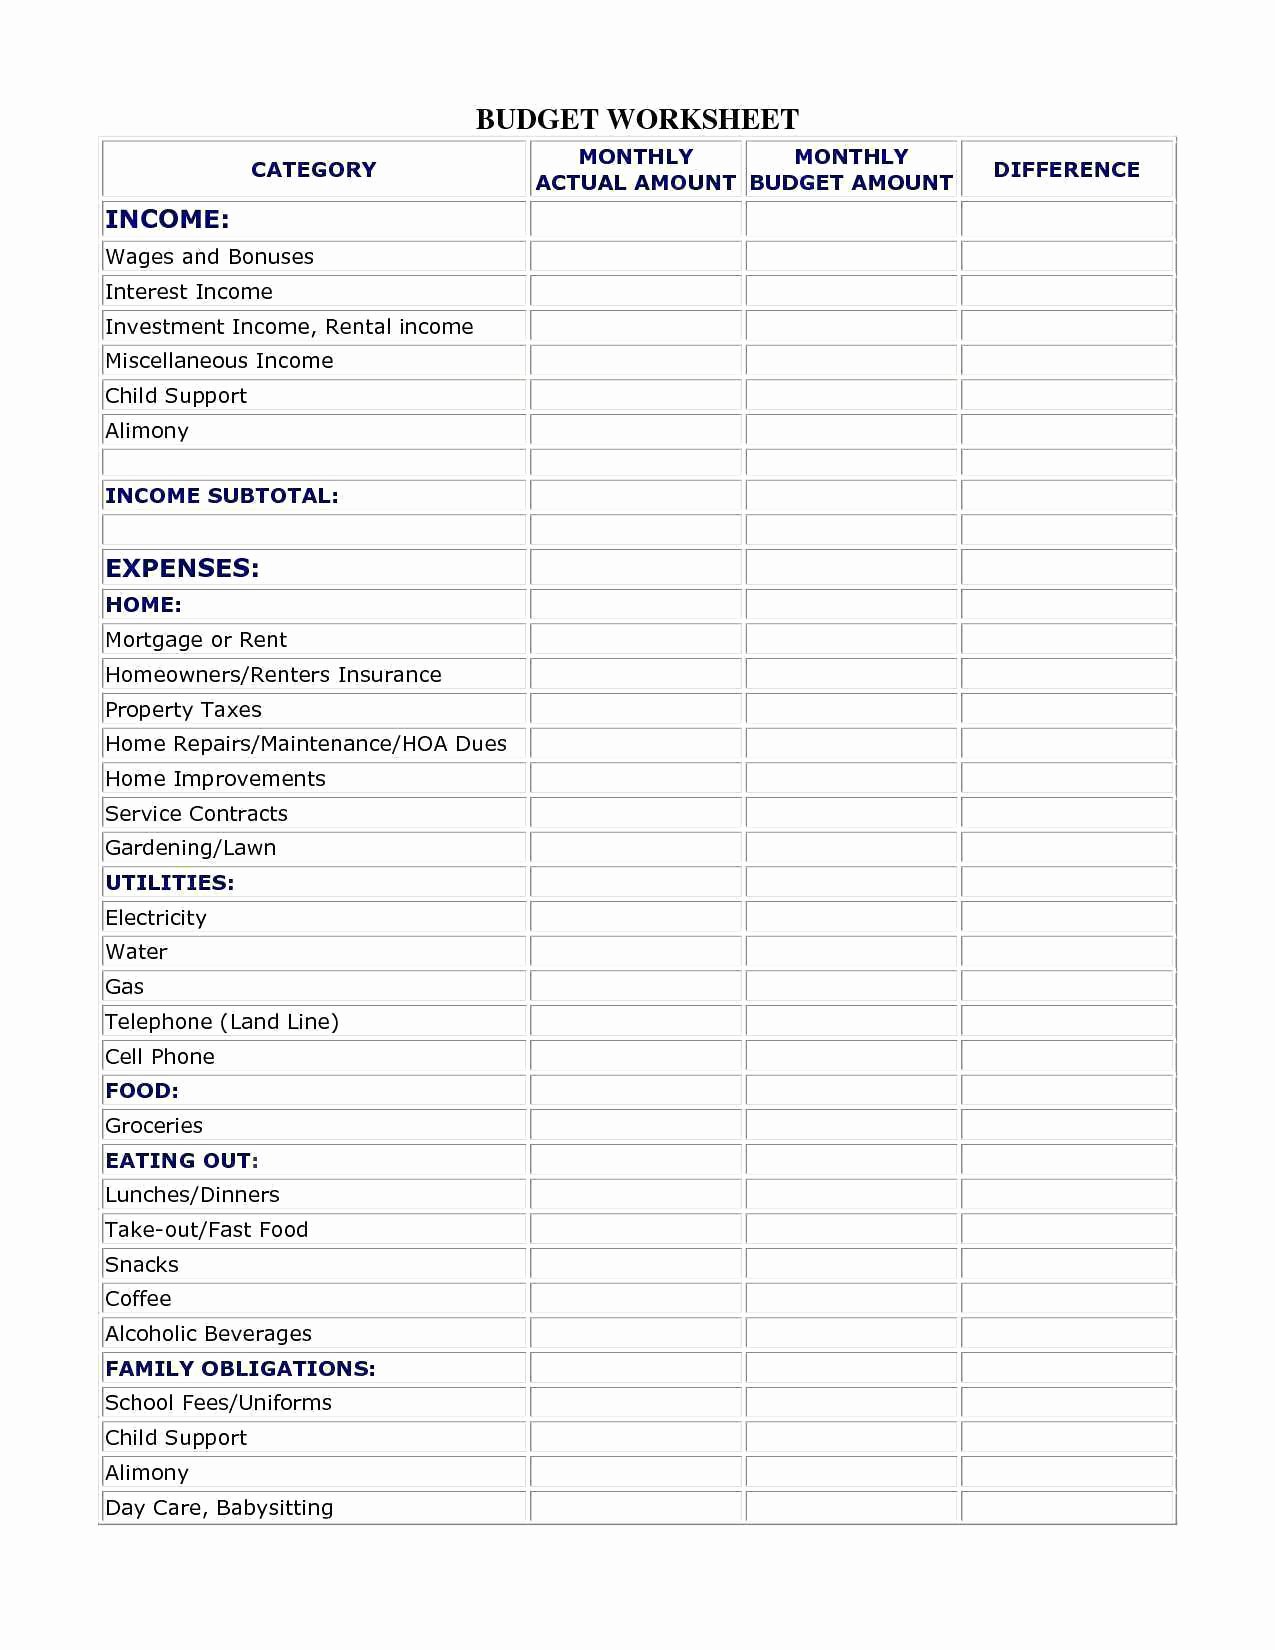 Home Maintenance Schedule Spreadsheet Awesome Lawn Care Schedule Spreadsheet Spreadsheet Downloa Lawn Care Schedule Spreadsheet Free Lawn